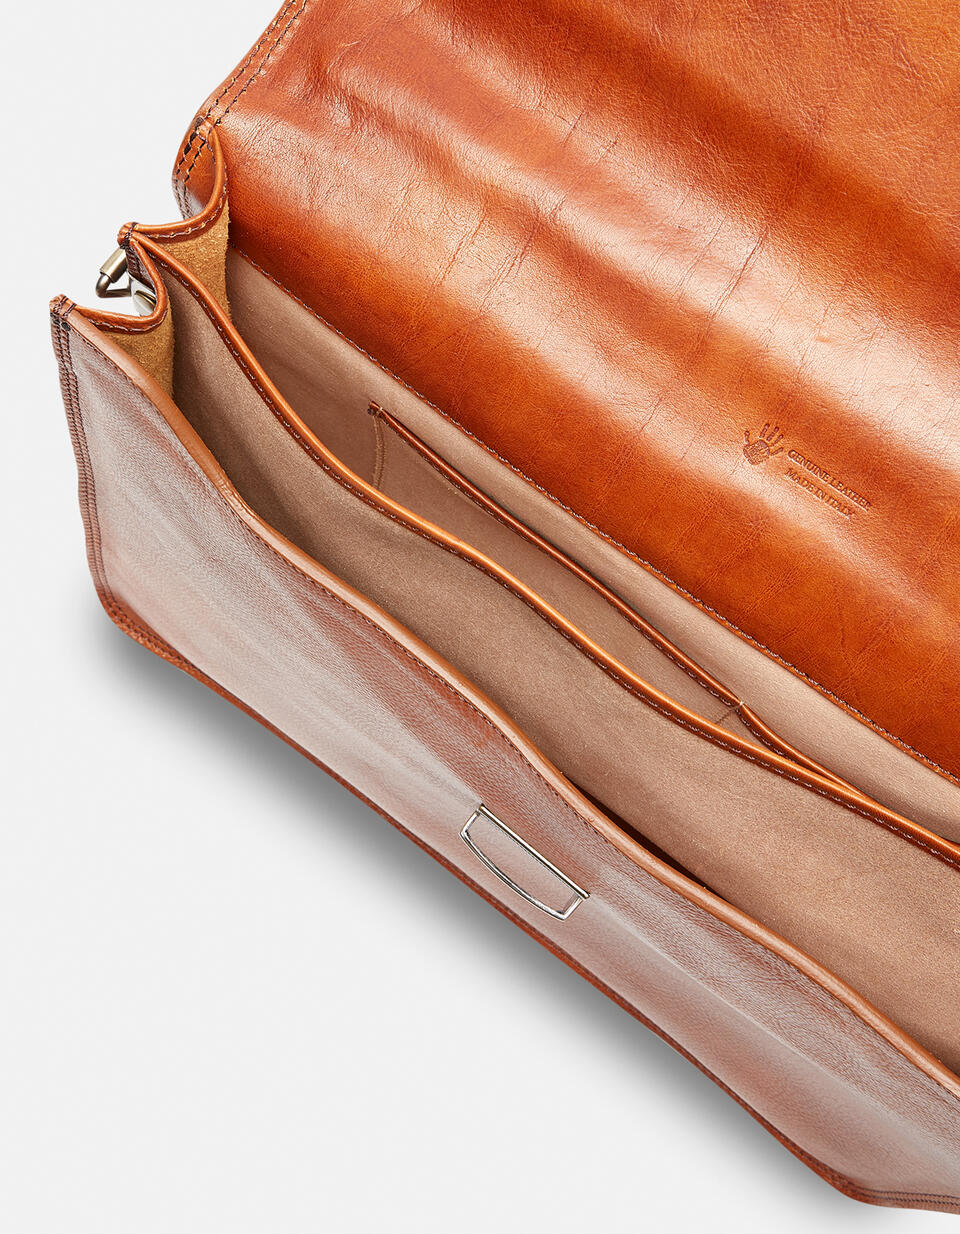 Tanned vegetable leather folder - Briefcases and Laptop Bags | Briefcases  - Briefcases and Laptop Bags | BriefcasesCuoieria Fiorentina